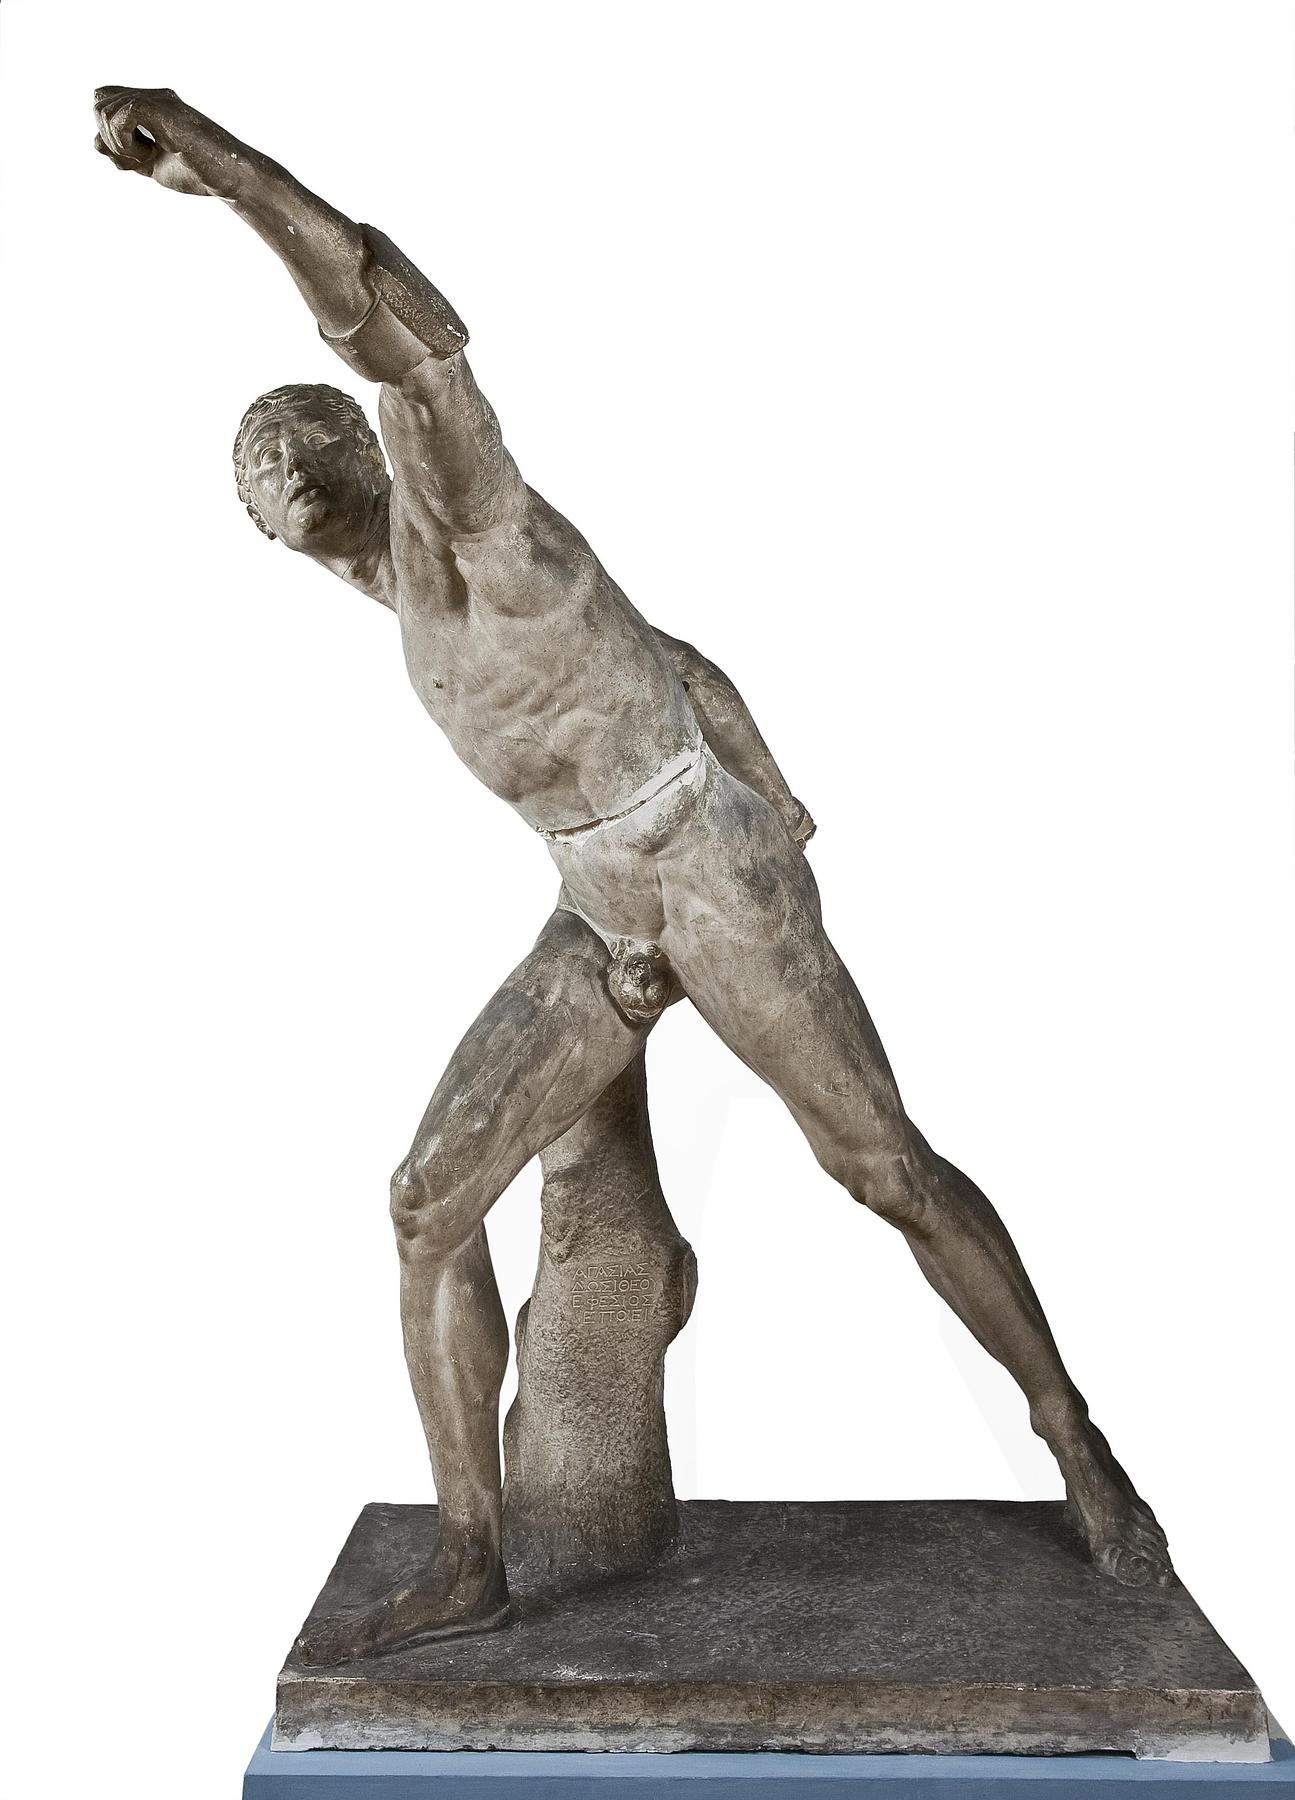 The Borghese Gladiator, L47